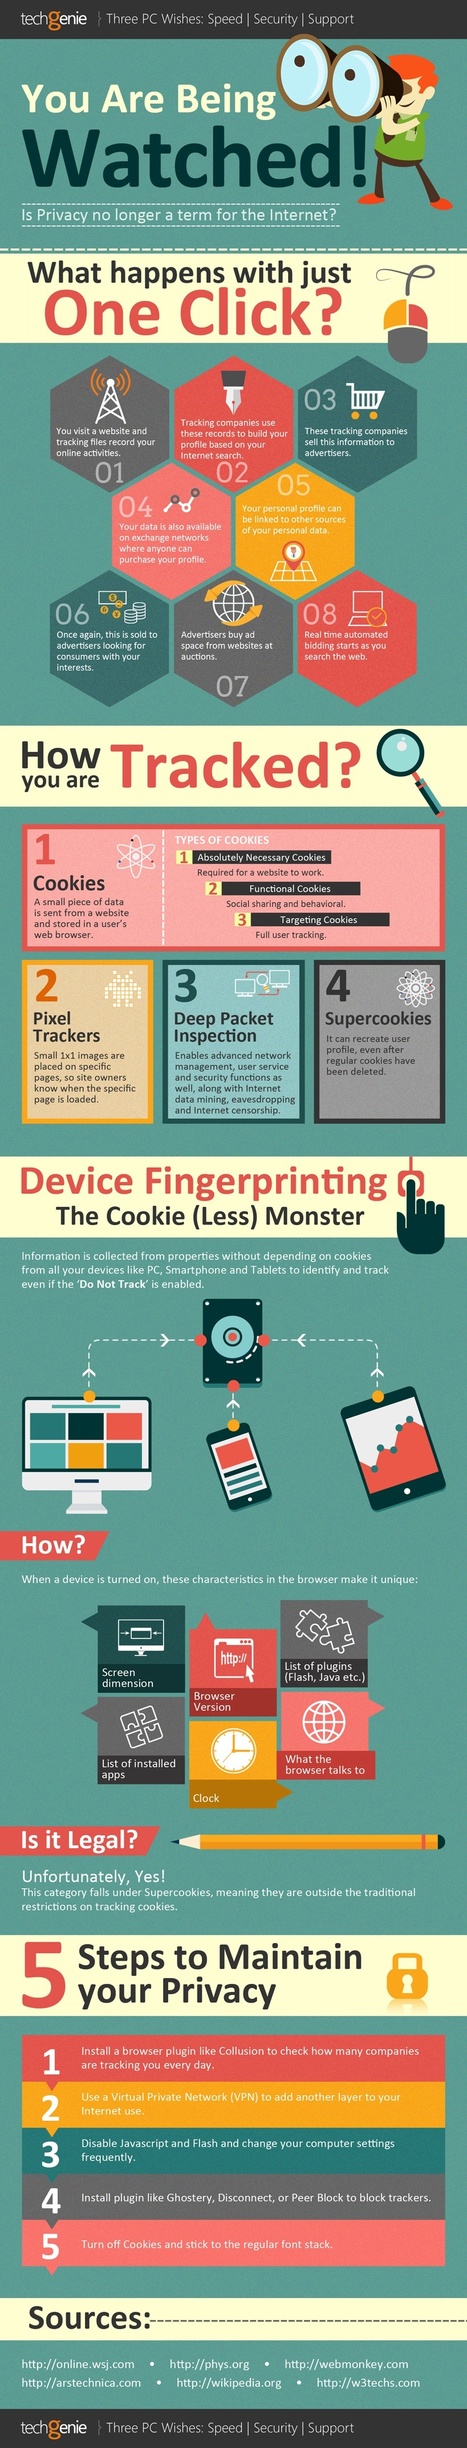 You’re Being Watched Online [Infographic] | 21st Century Learning and Teaching | Scoop.it